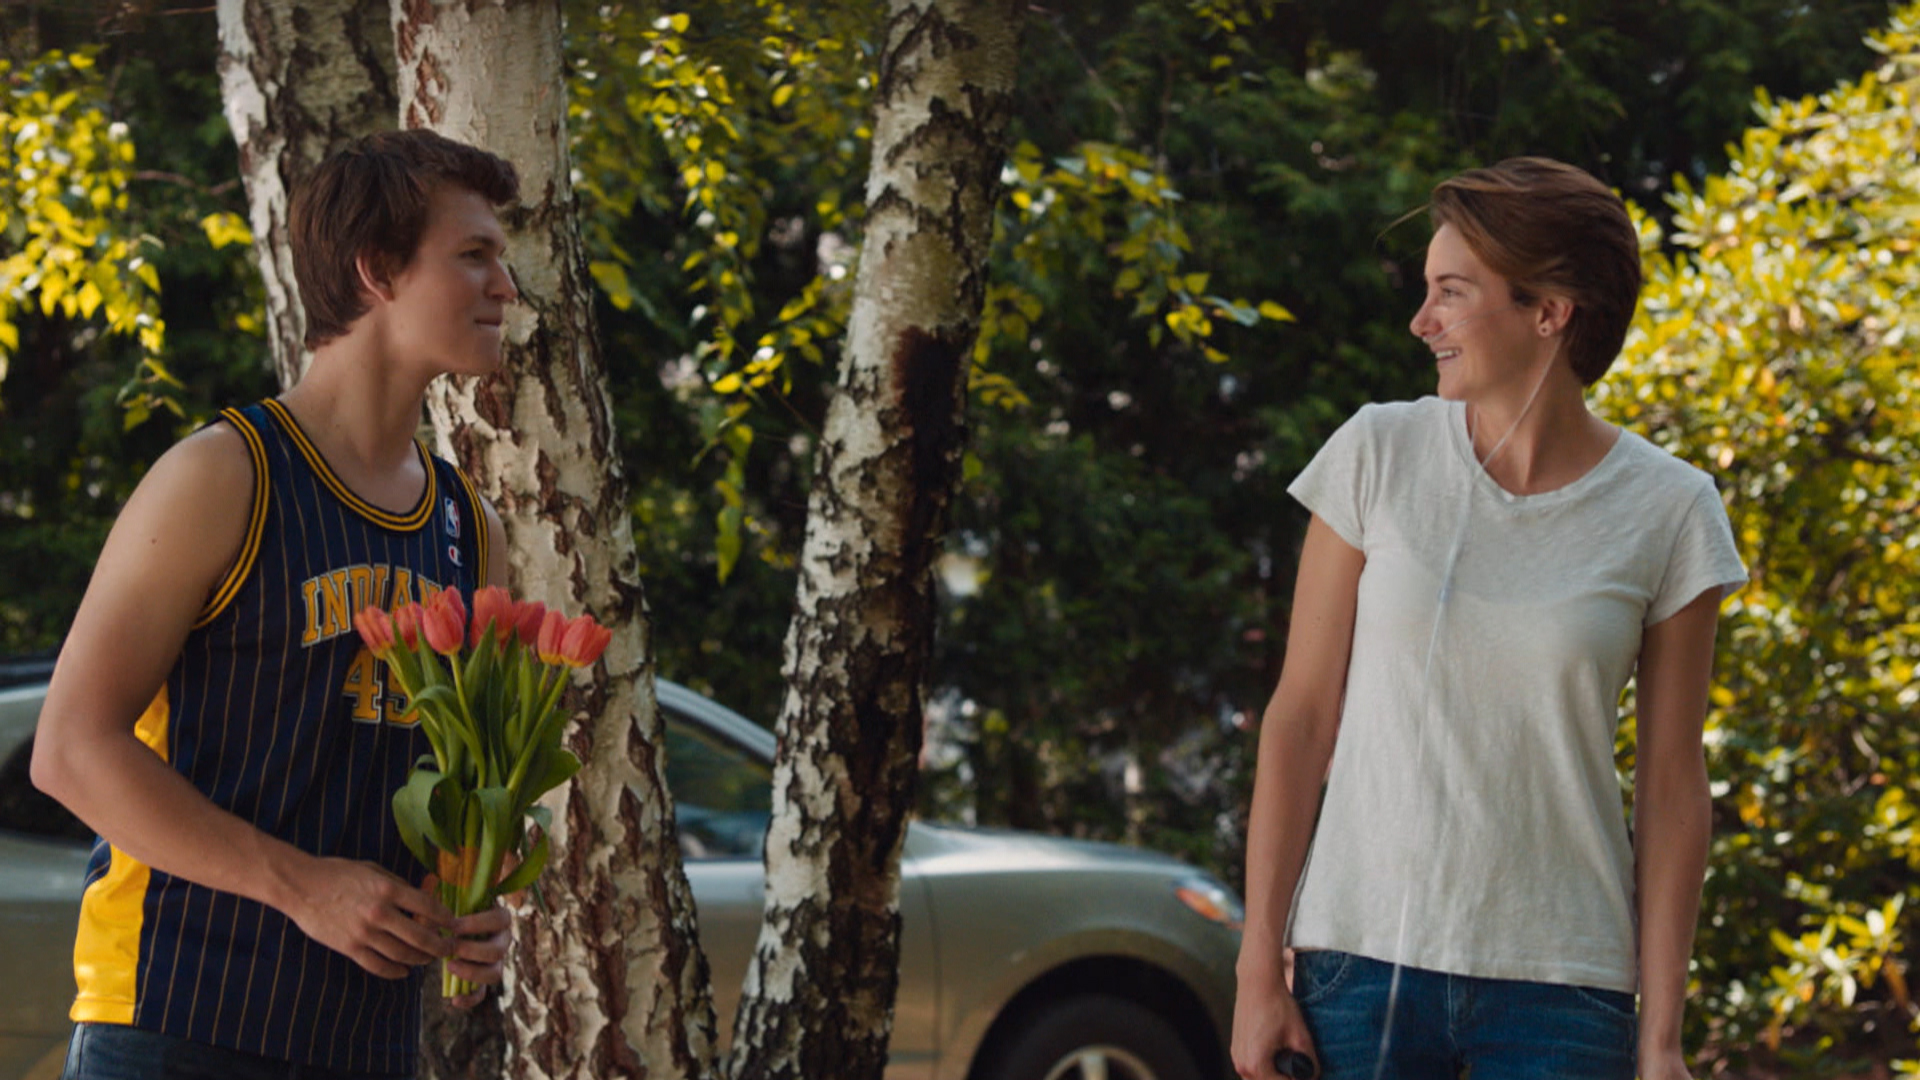 THEATRICAL REVIEW: The Fault in Our Stars | The Viewer's Commentary1920 x 1080